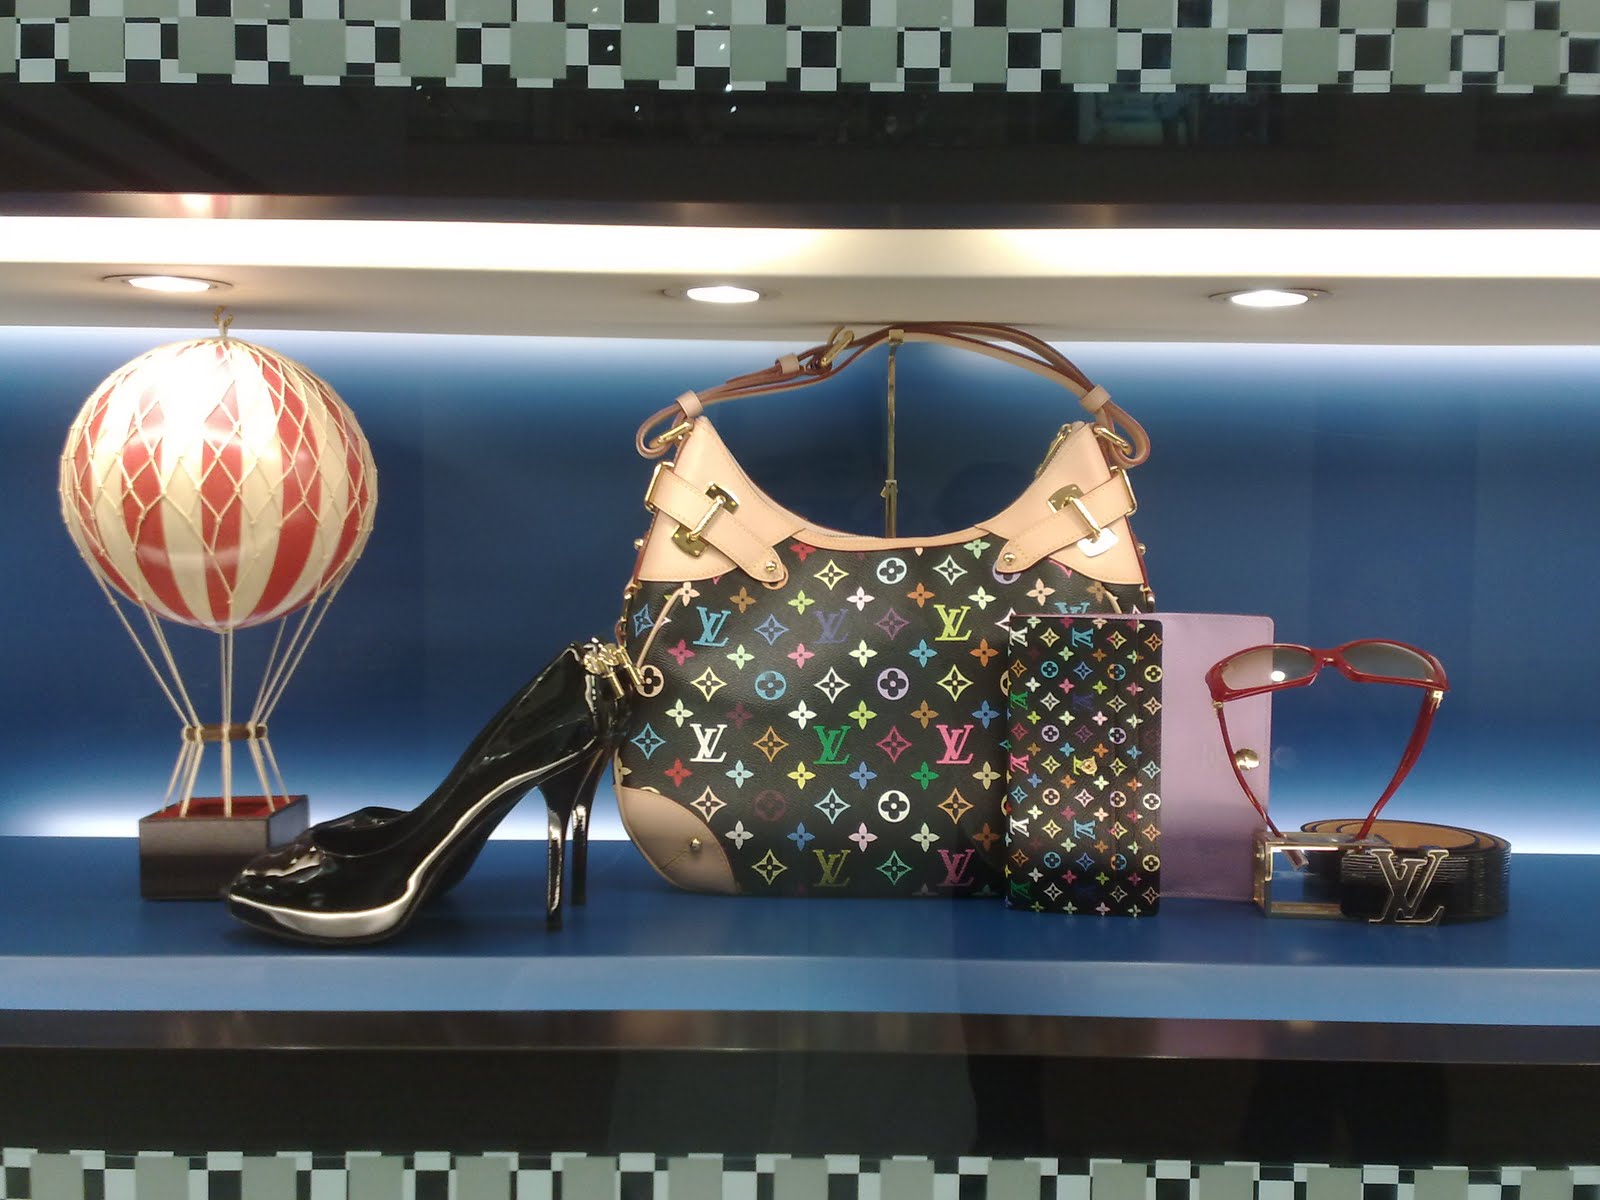 displayhunter: Louis Vuitton: Hot balloons and the sea